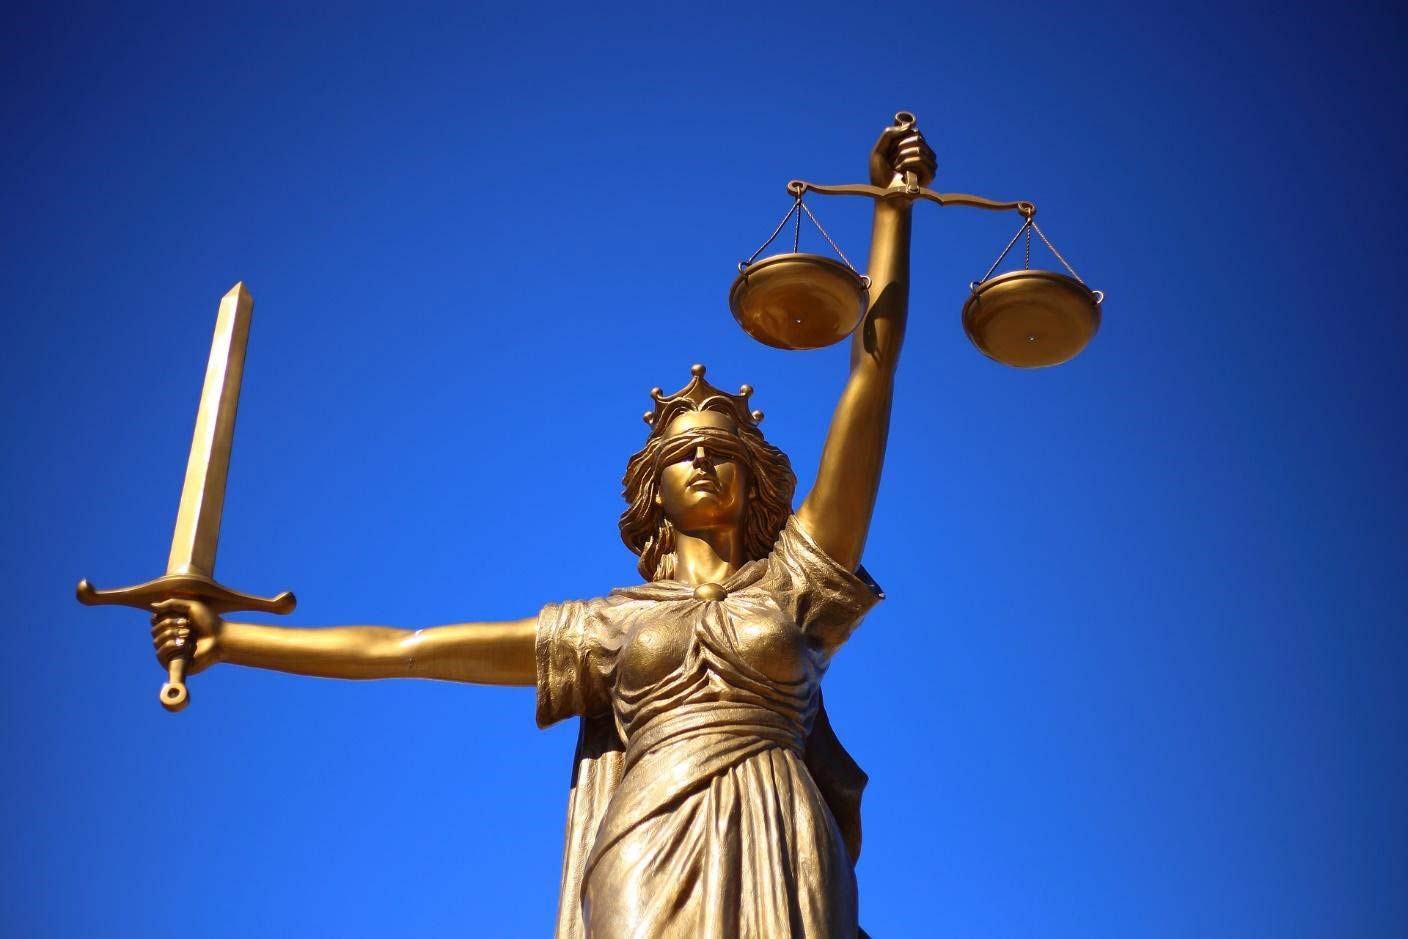 Statue of a woman holding the scales of justice